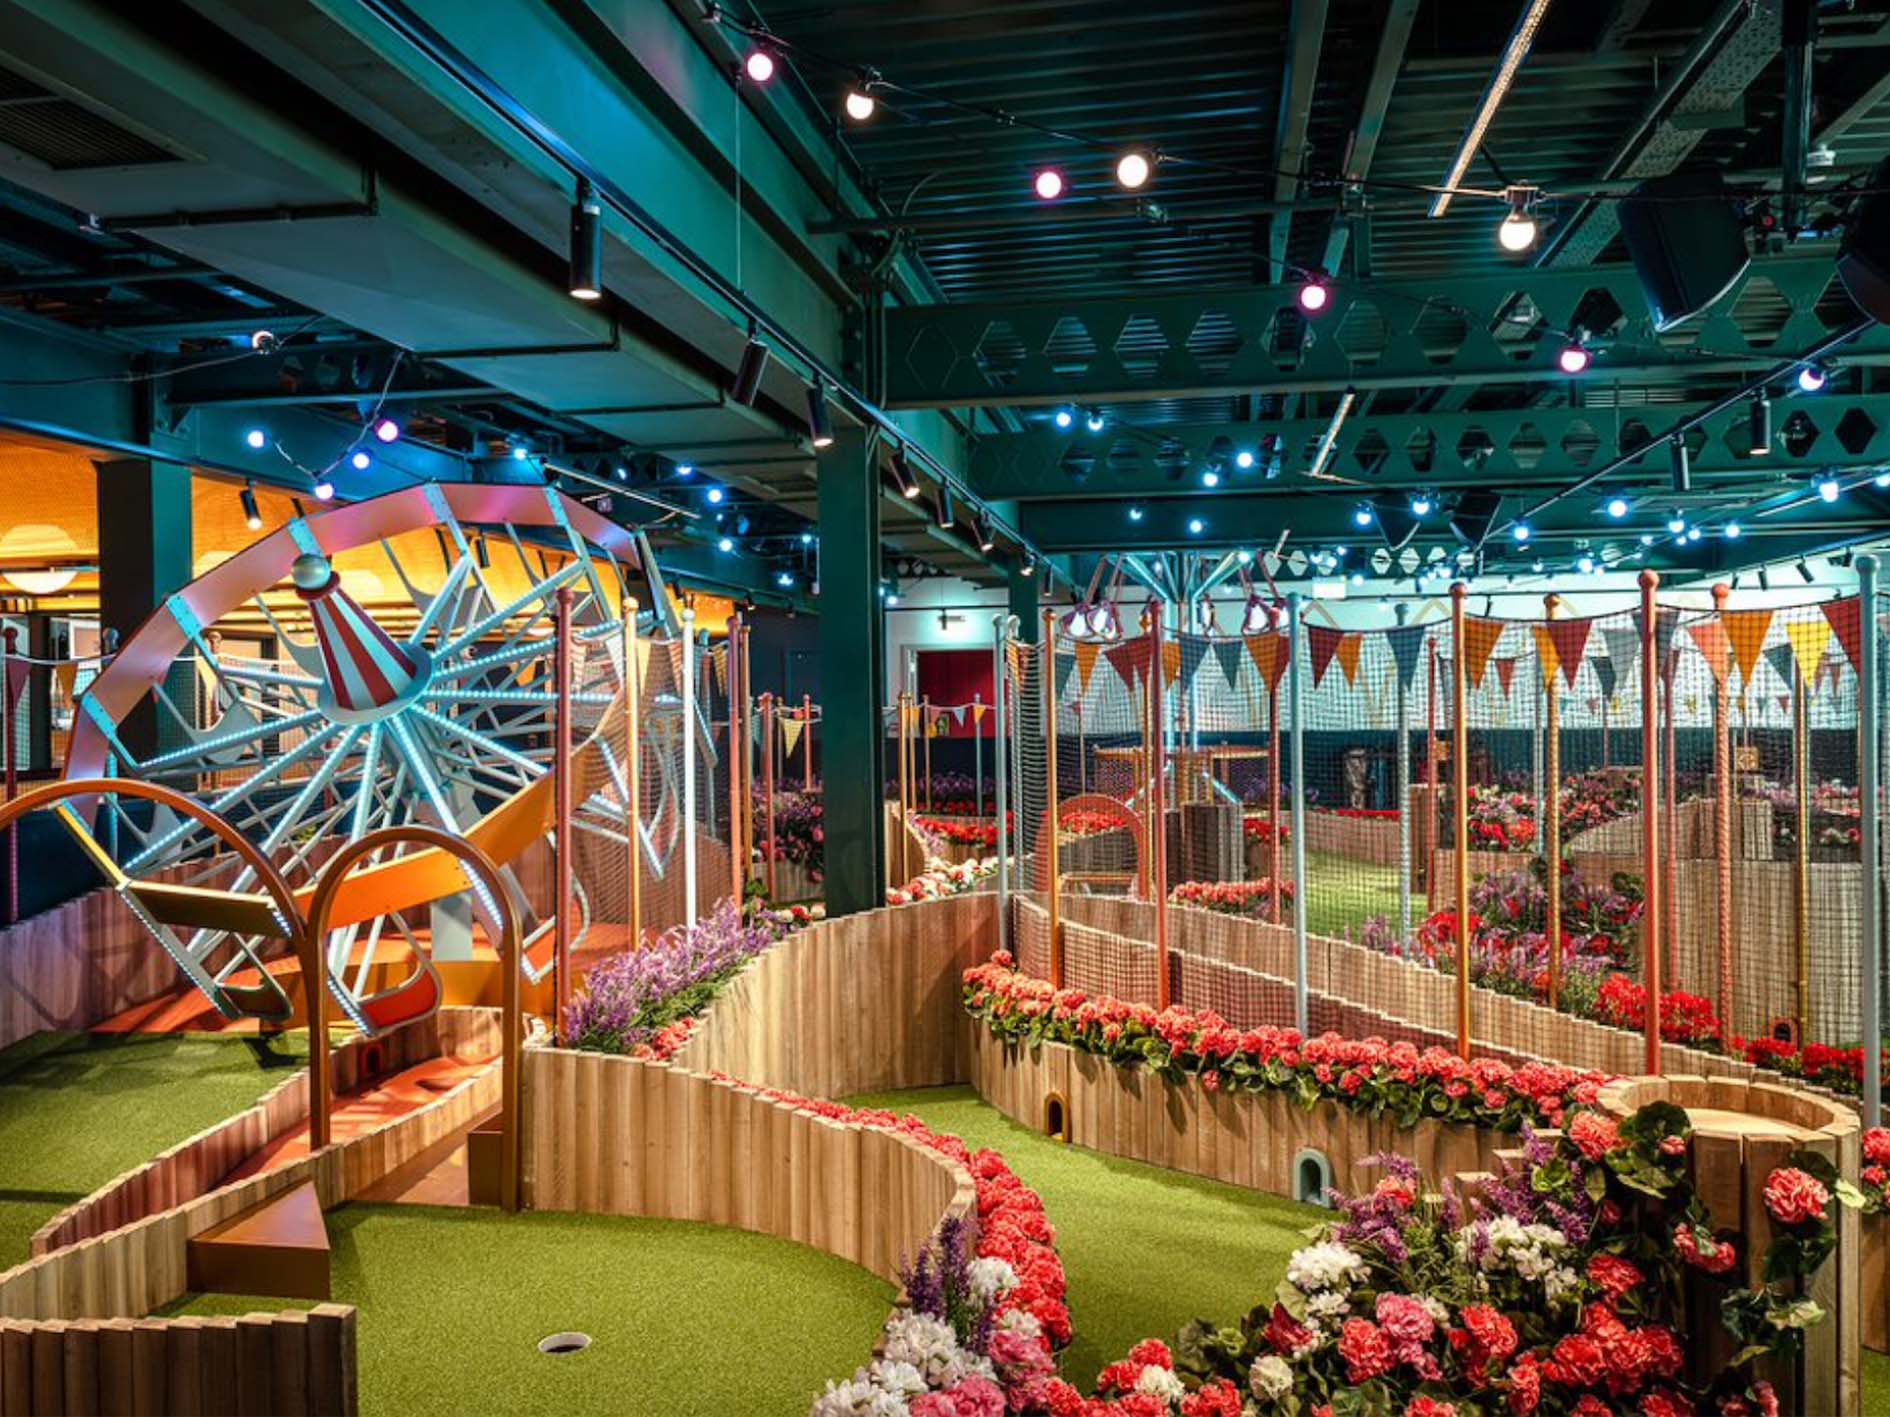 An indoor crazy golf course featuring a colourful spinning wheel and flowers lining the green.